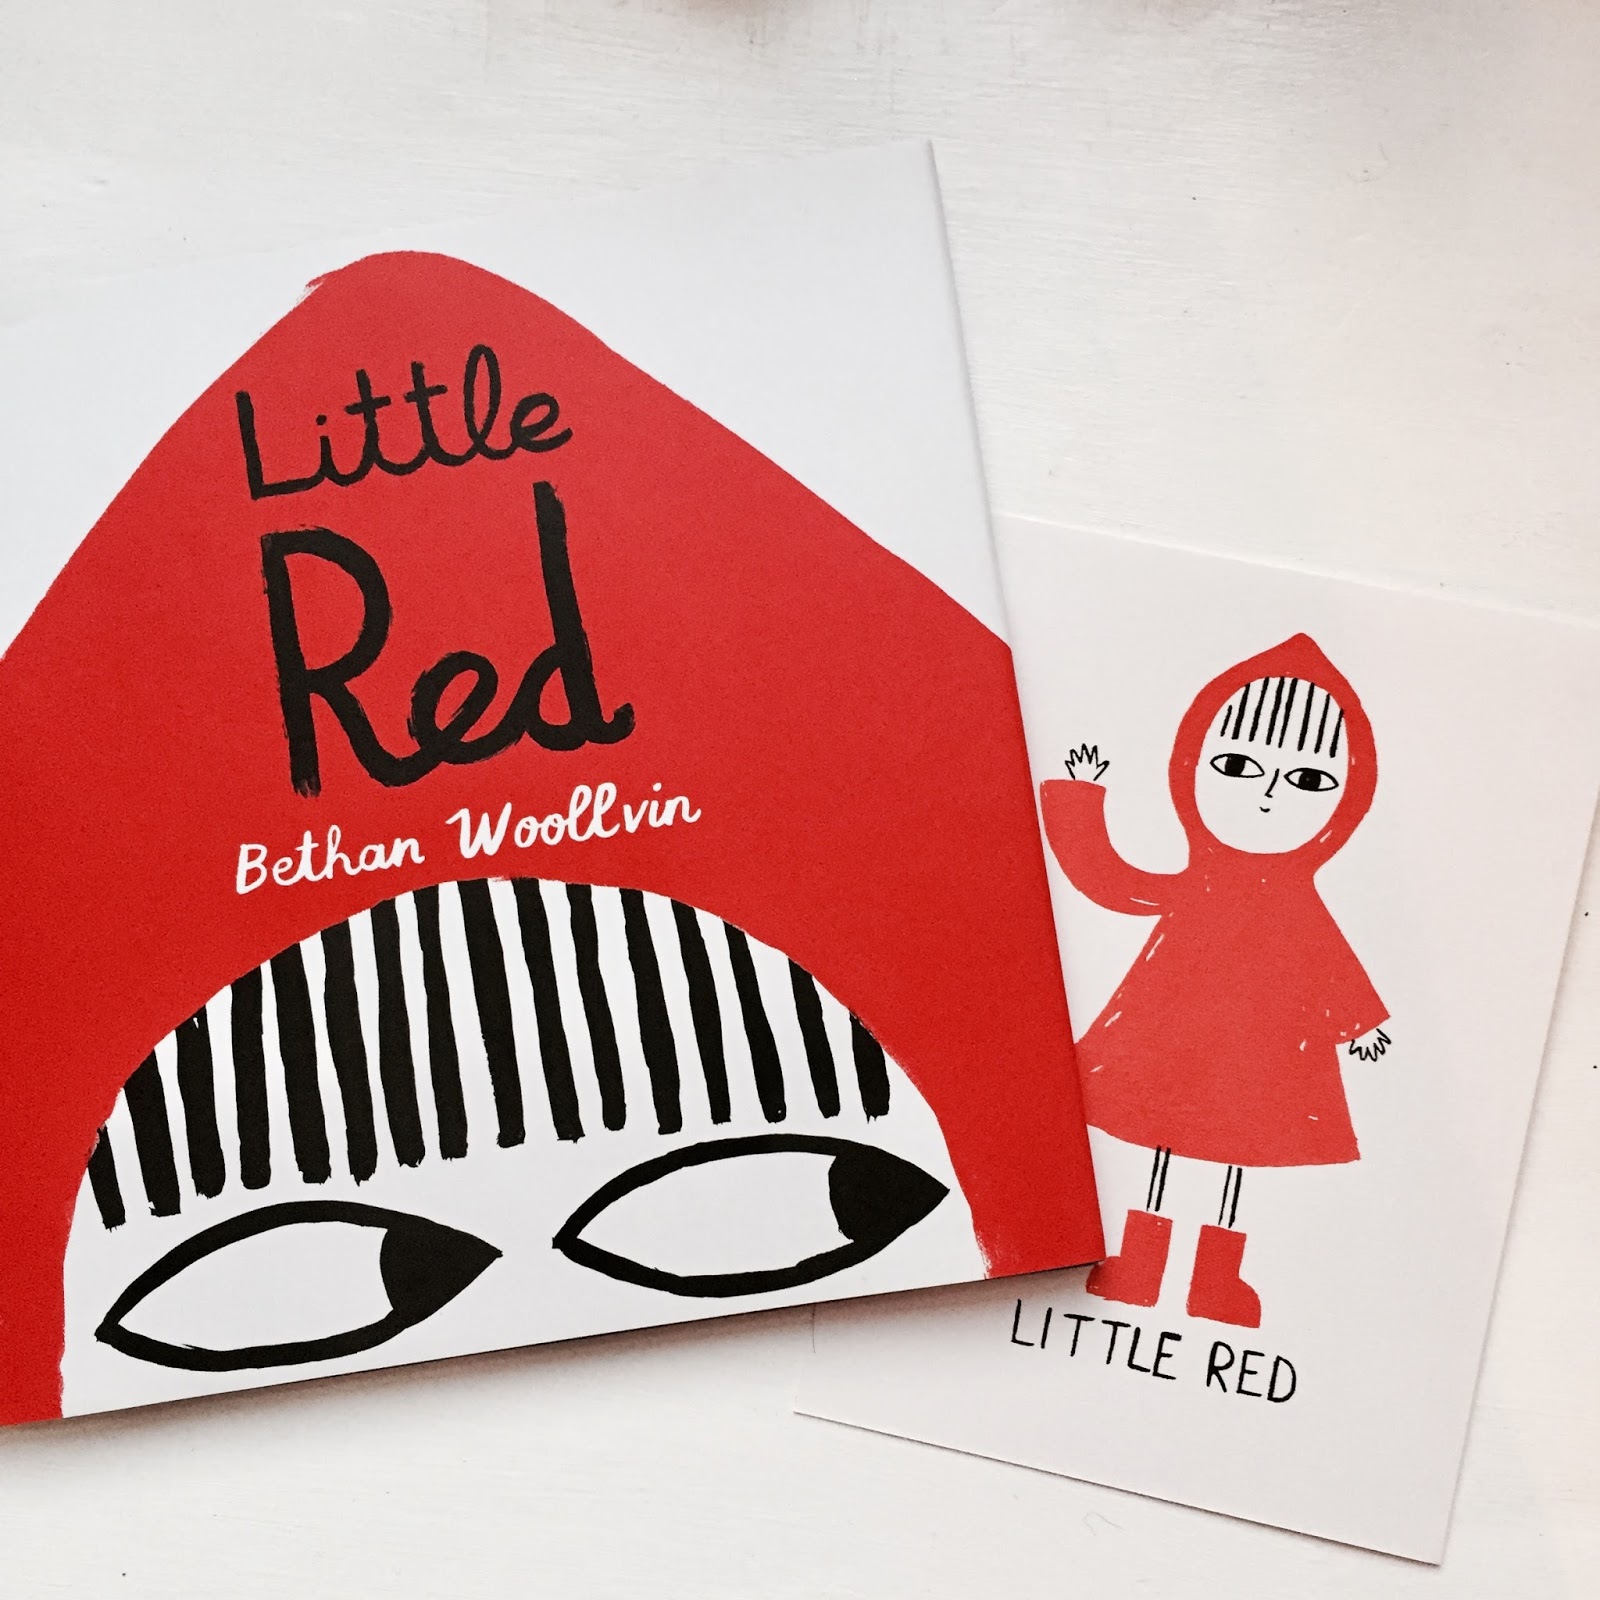 Little Red is a New York Times Best Illustrated Children’s Book